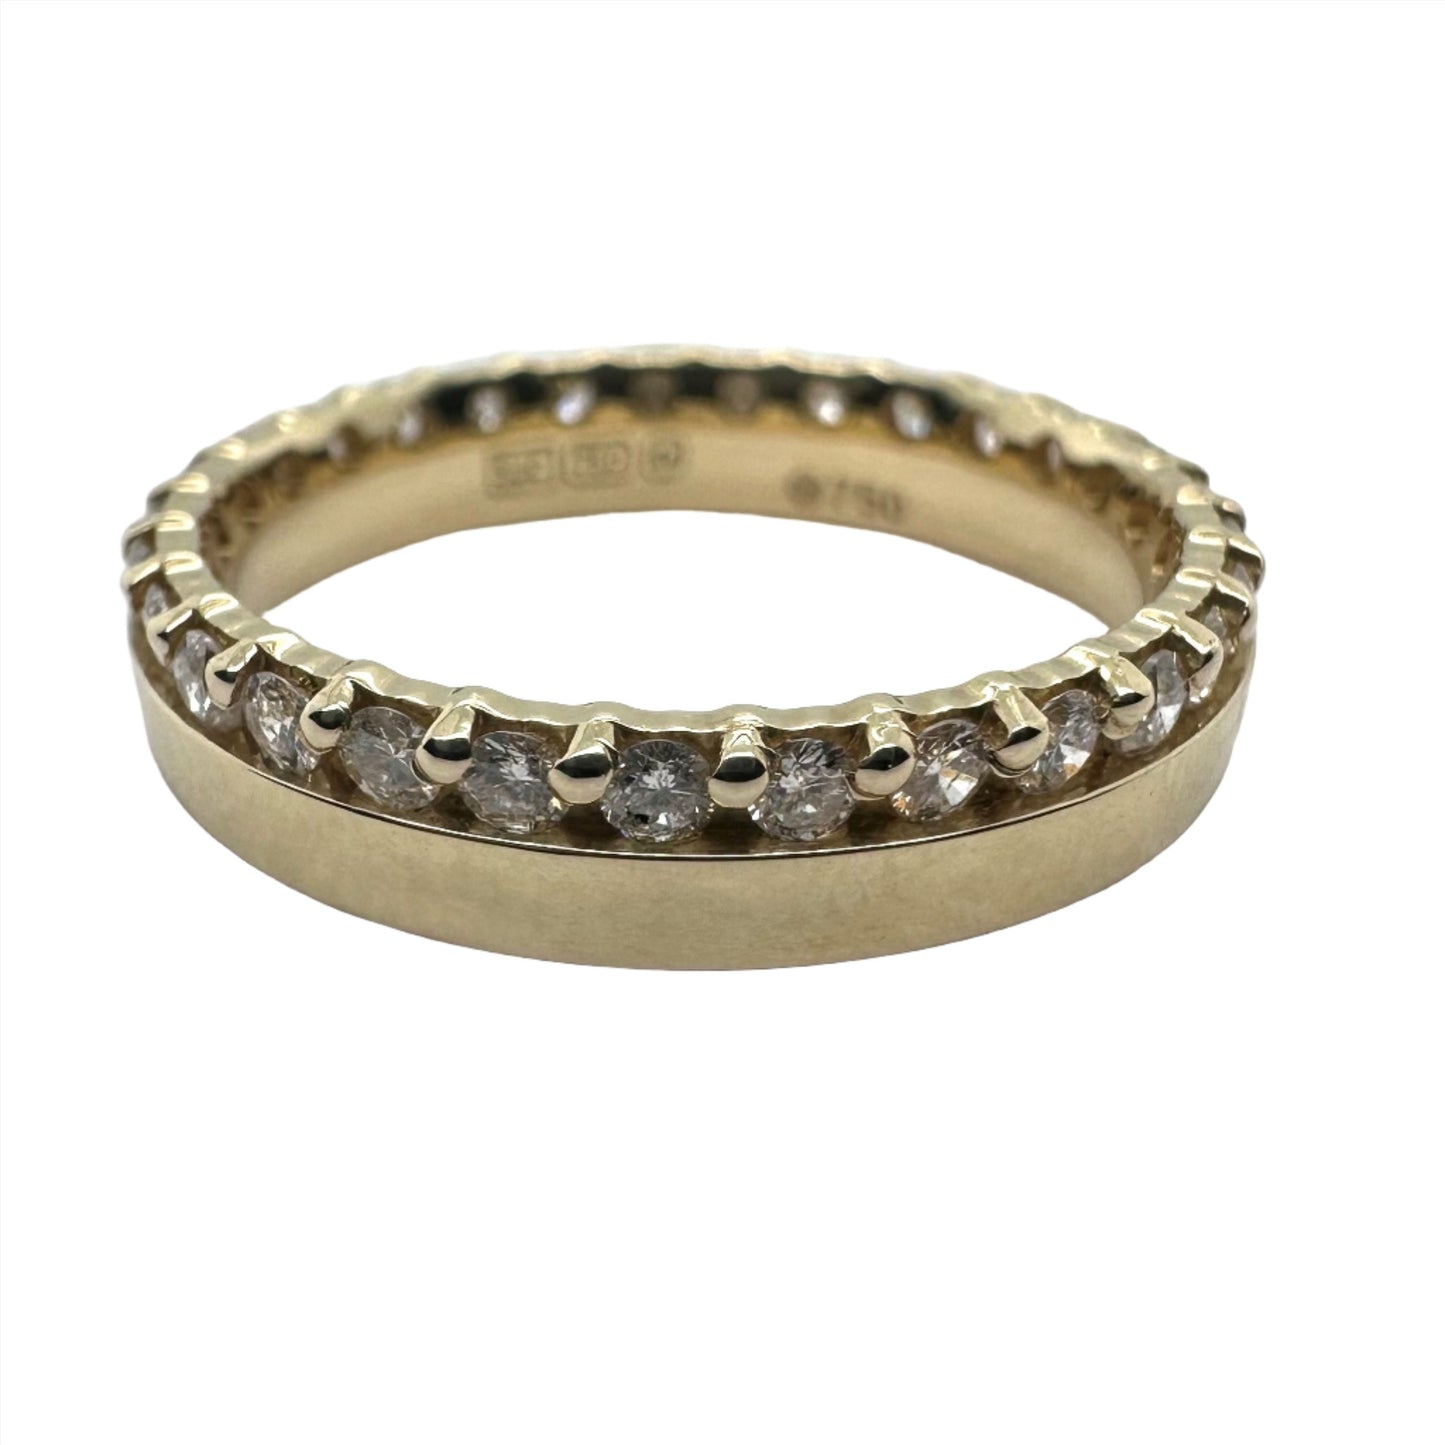 18ct yellow gold wedding ring adorned with round brilliant cut diamonds